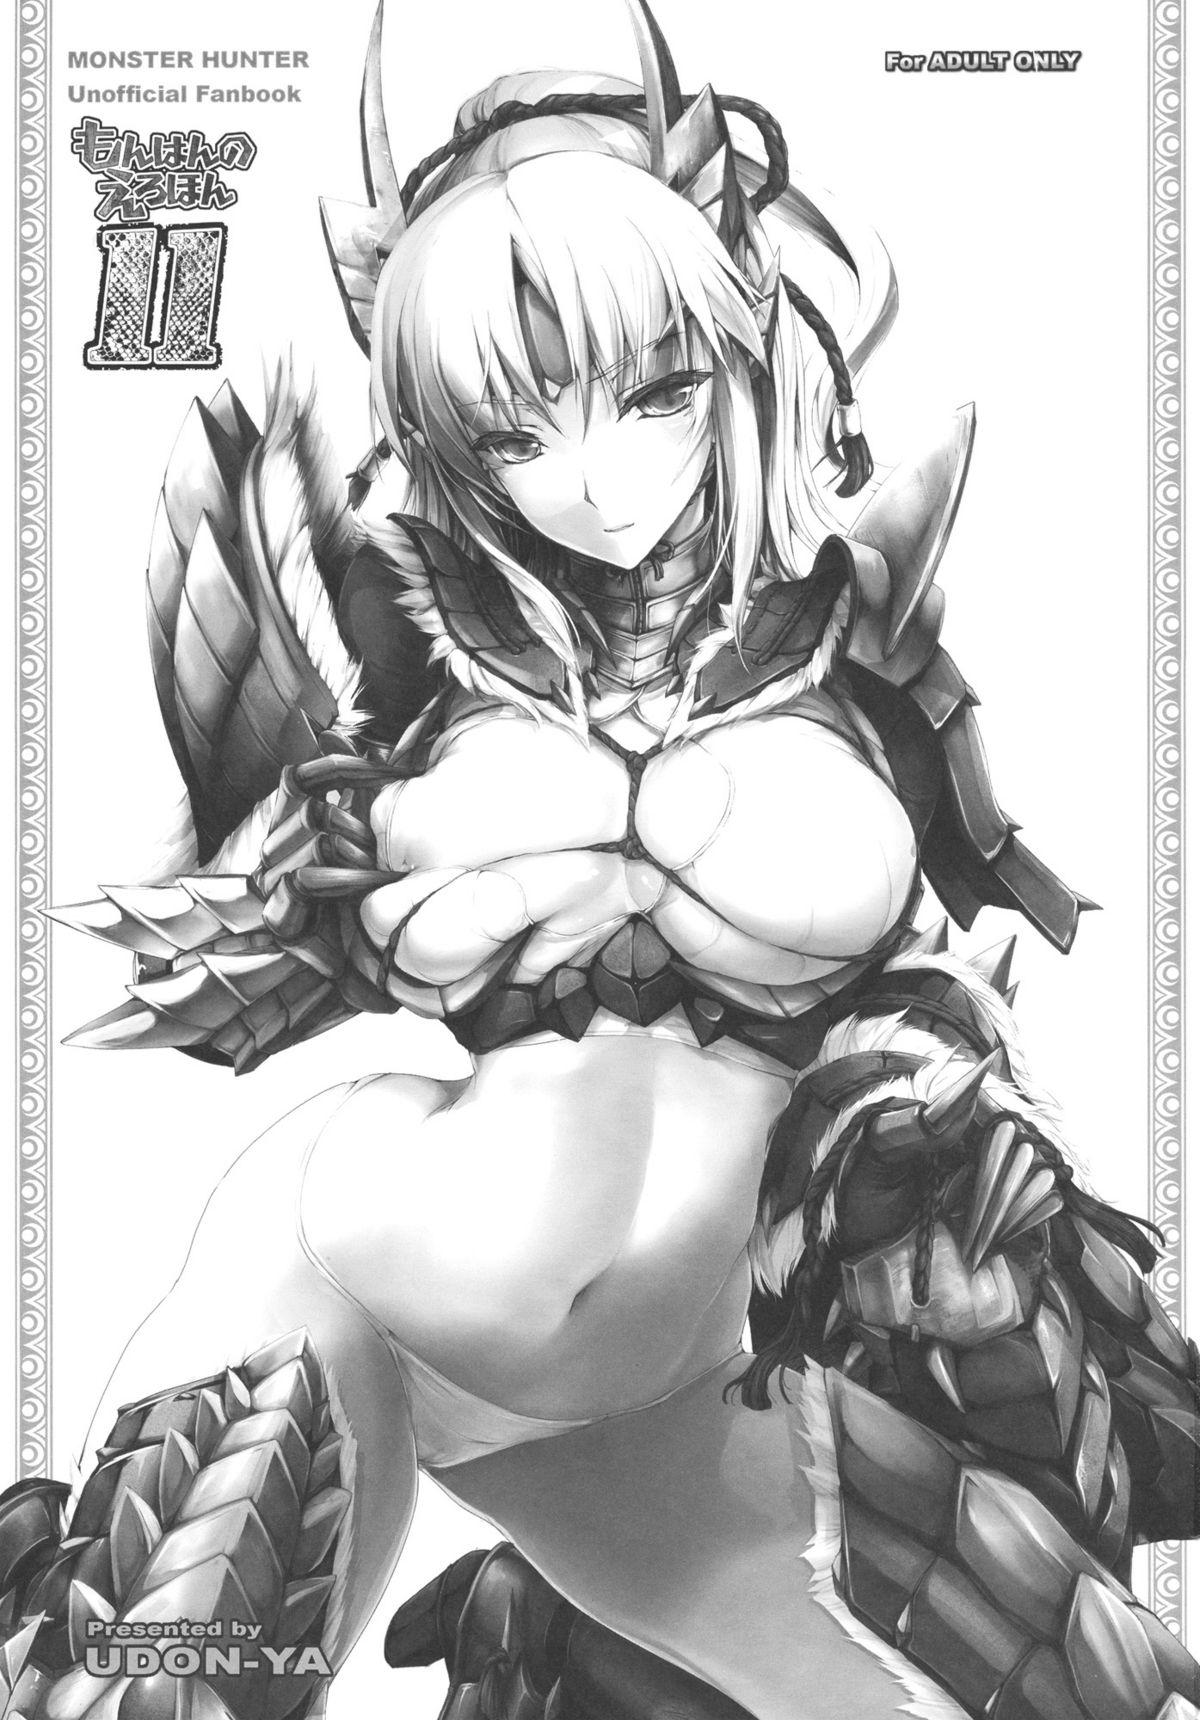 Hot Blow Jobs Monhan no Erohon 11 - Monster hunter Leaked - Page 2